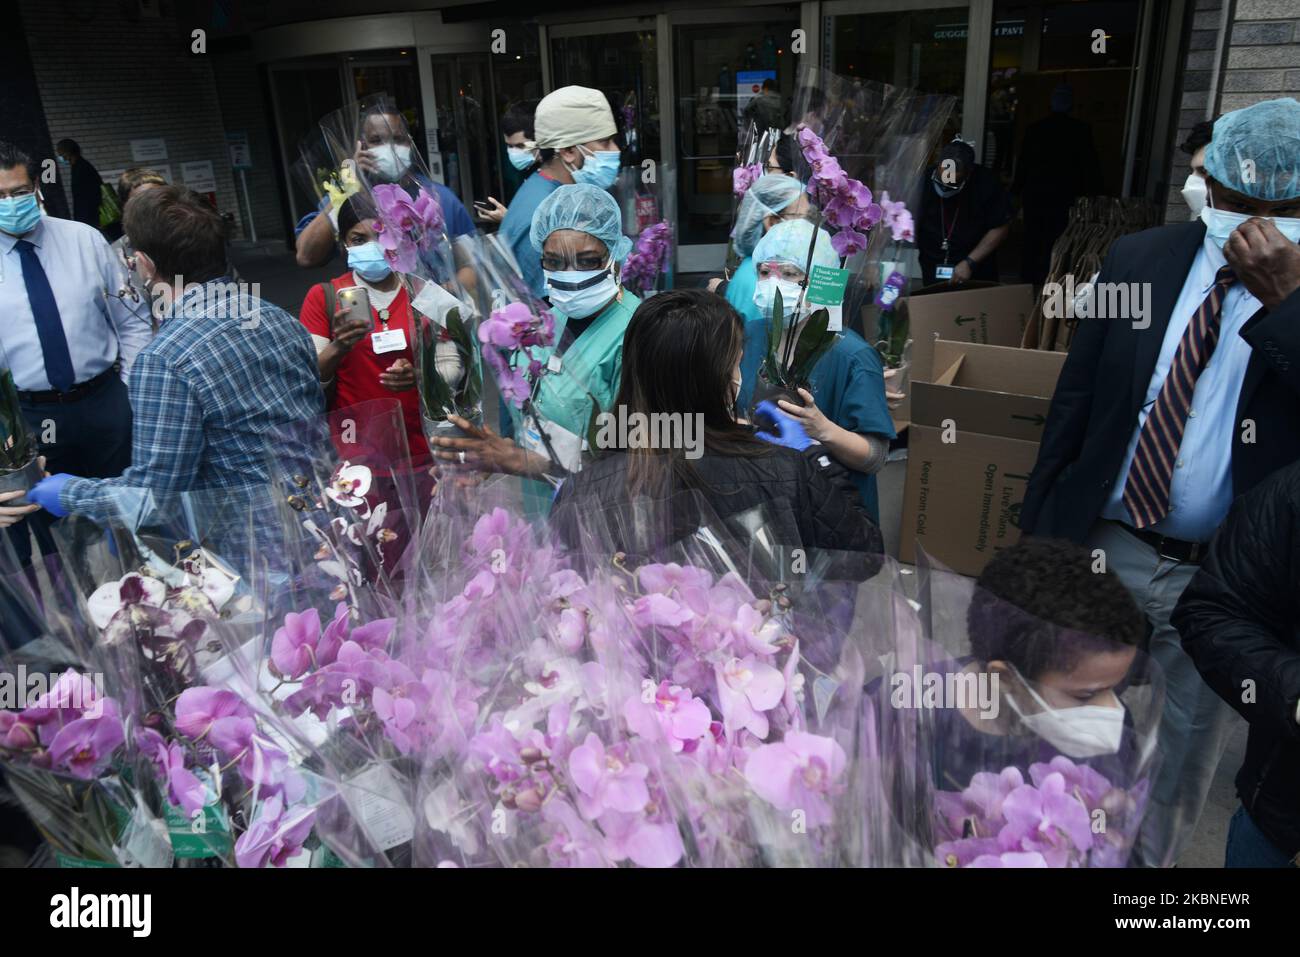 Hundreds of doctors and nurses from New York's Mount Sinai Hospital line up to receive flowers after donors delivered thousands of bouquets of orchids as a gesture of thanks during the coronavirus epidemic, Thursday, 07 May 2020. (Photo by B.A. Van Sise/NurPhoto) Stock Photo